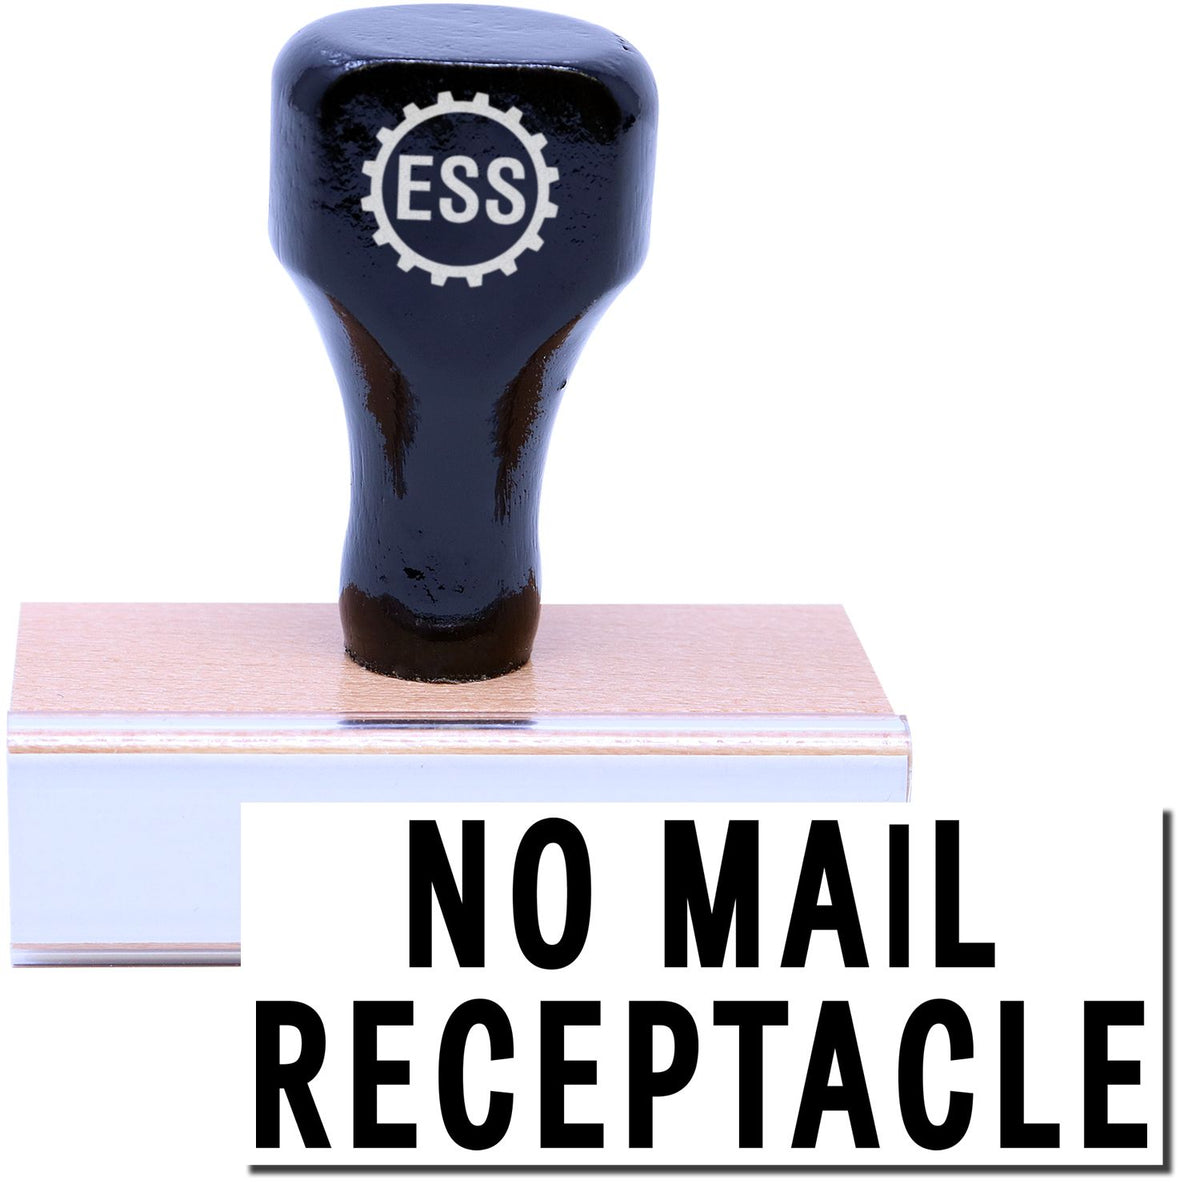 A stock office rubber stamp with a stamped image showing how the text &quot;NO MAIL RECEPTACLE&quot; is displayed after stamping.